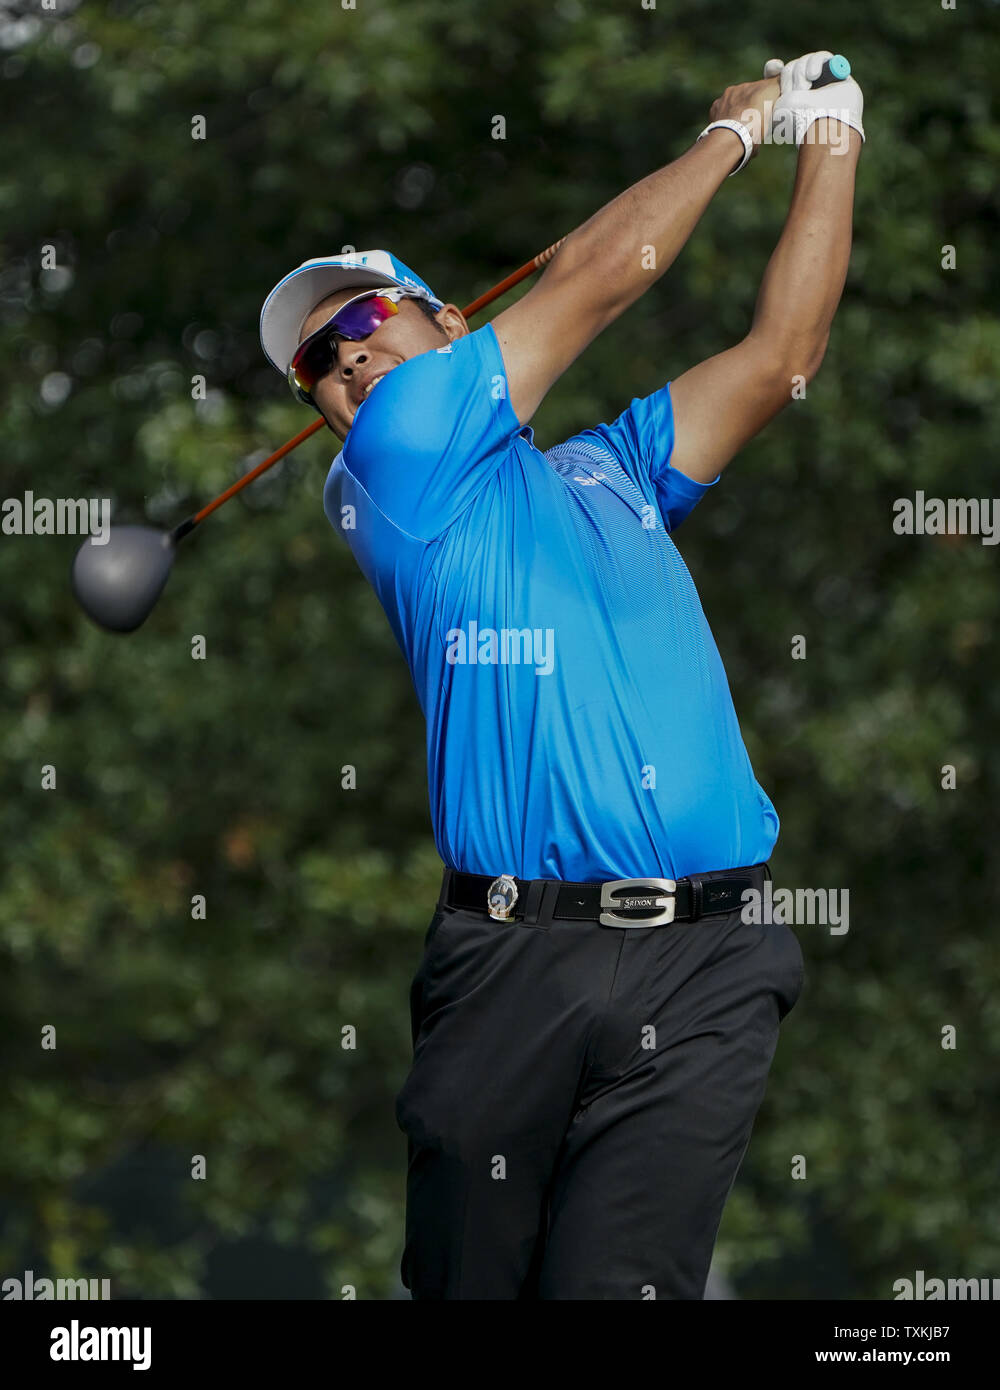 Hideki Matsuyama, of Japan, hits his tee shot off the 16th tee box during the first round of the 2017 PGA Championship at the Quail Hollow Club in Charlotte, North Carolina on August 10, 2017. Photo by Nell Redmond/UPI Stock Photo